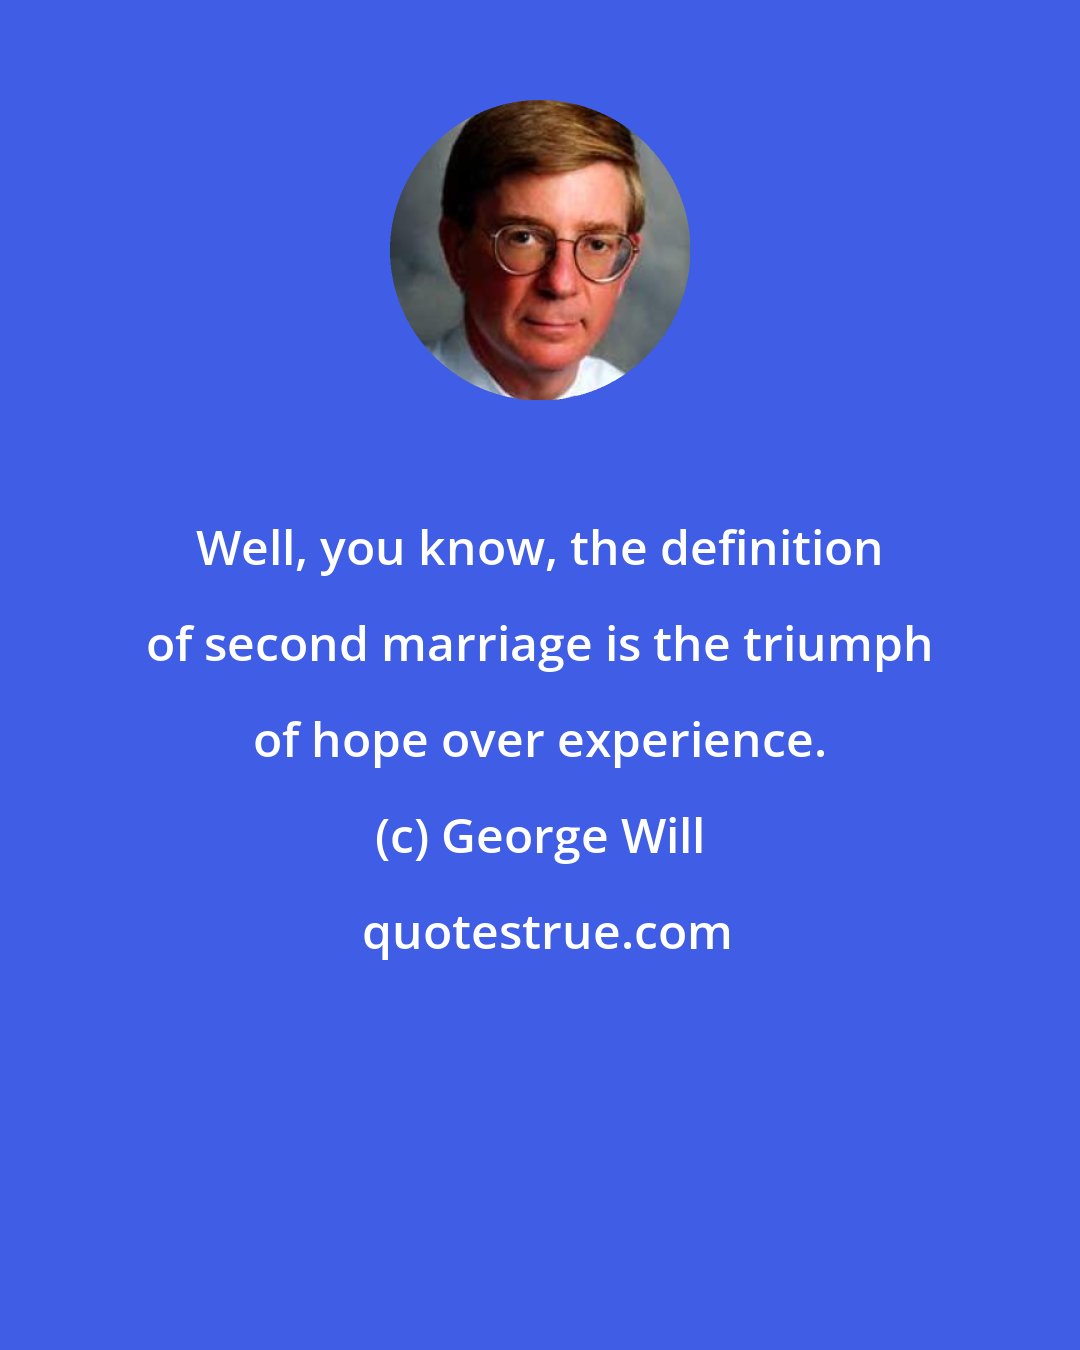 George Will: Well, you know, the definition of second marriage is the triumph of hope over experience.